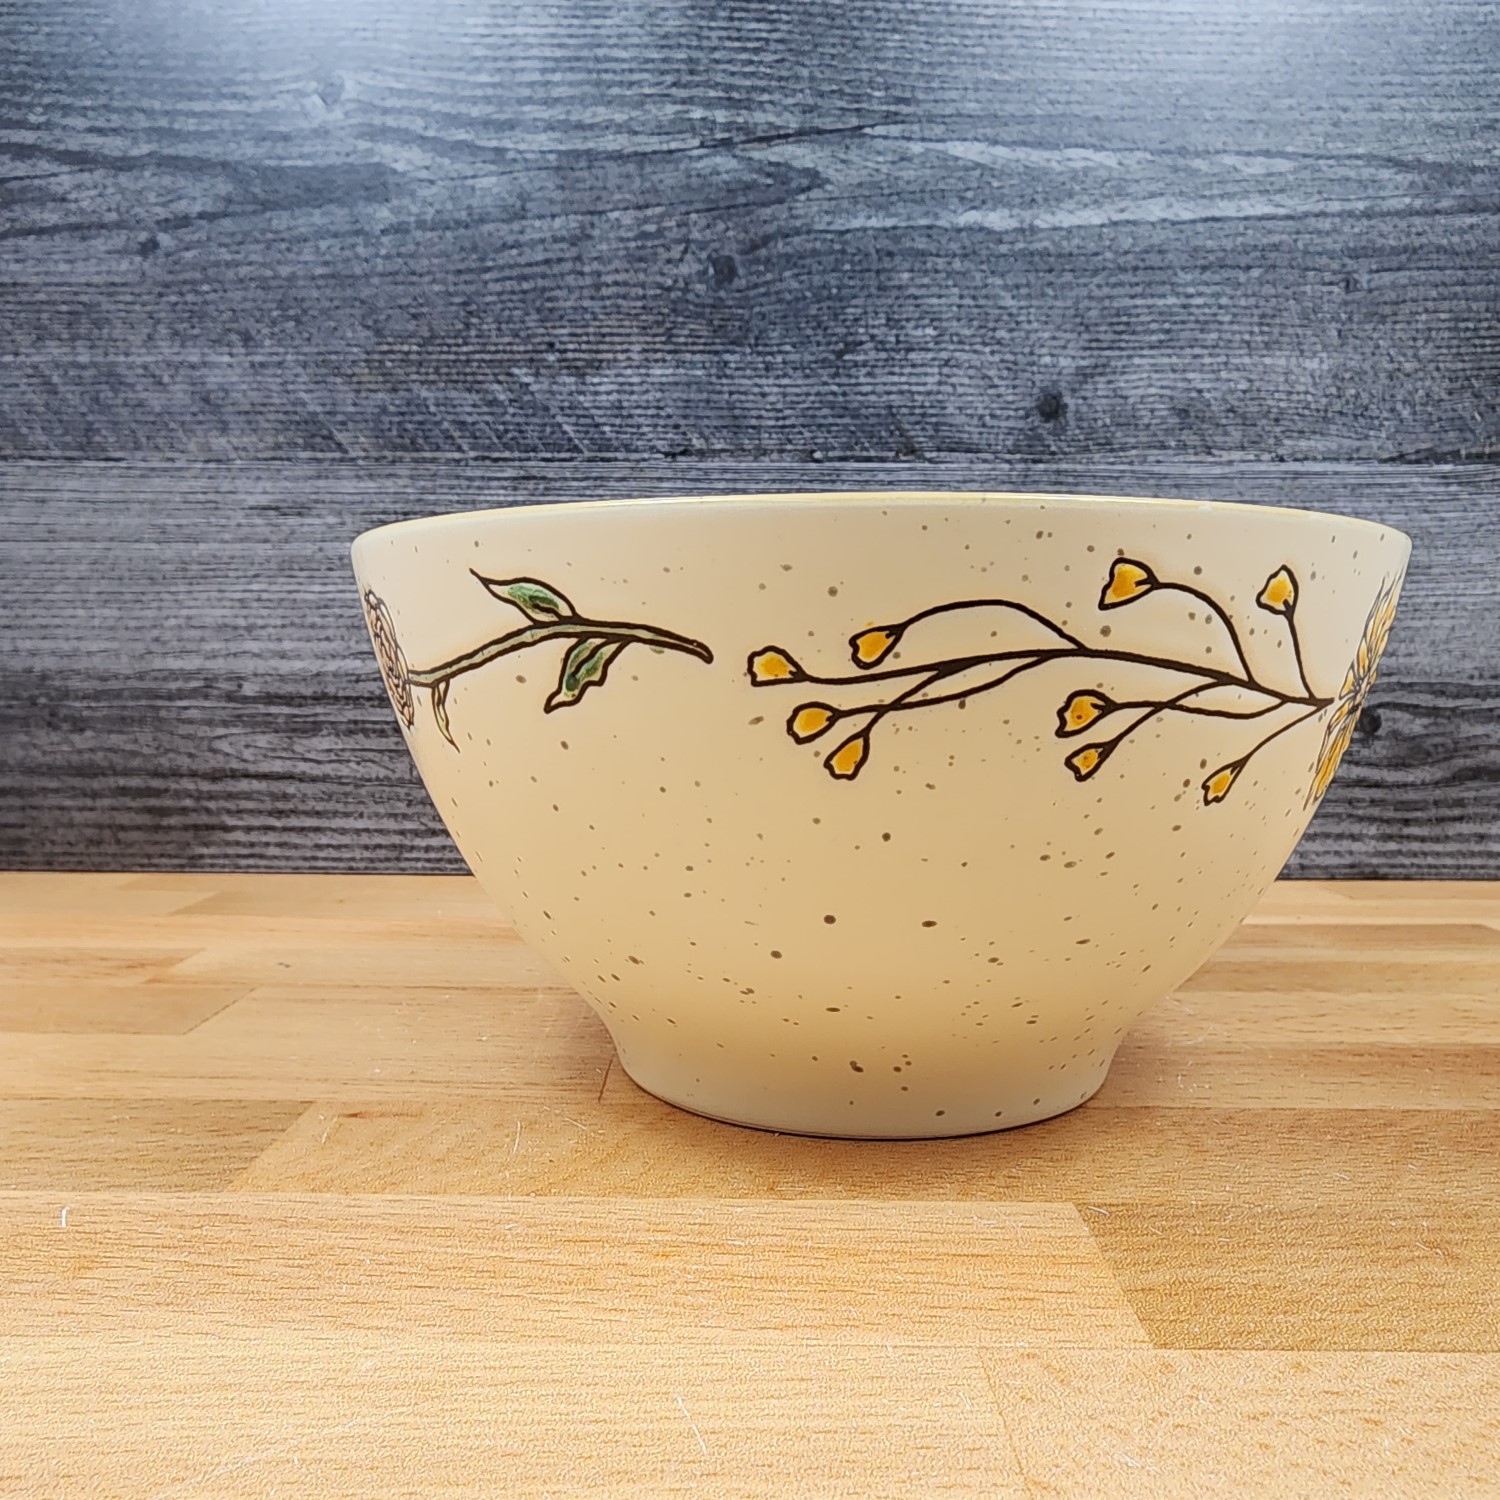 This Daisy Spring Flowers Festive Bowl 6 inch (15cm) Floral Dish by Blue Sky is made with love by Premier Homegoods! Shop more unique gift ideas today with Spots Initiatives, the best way to support creators.